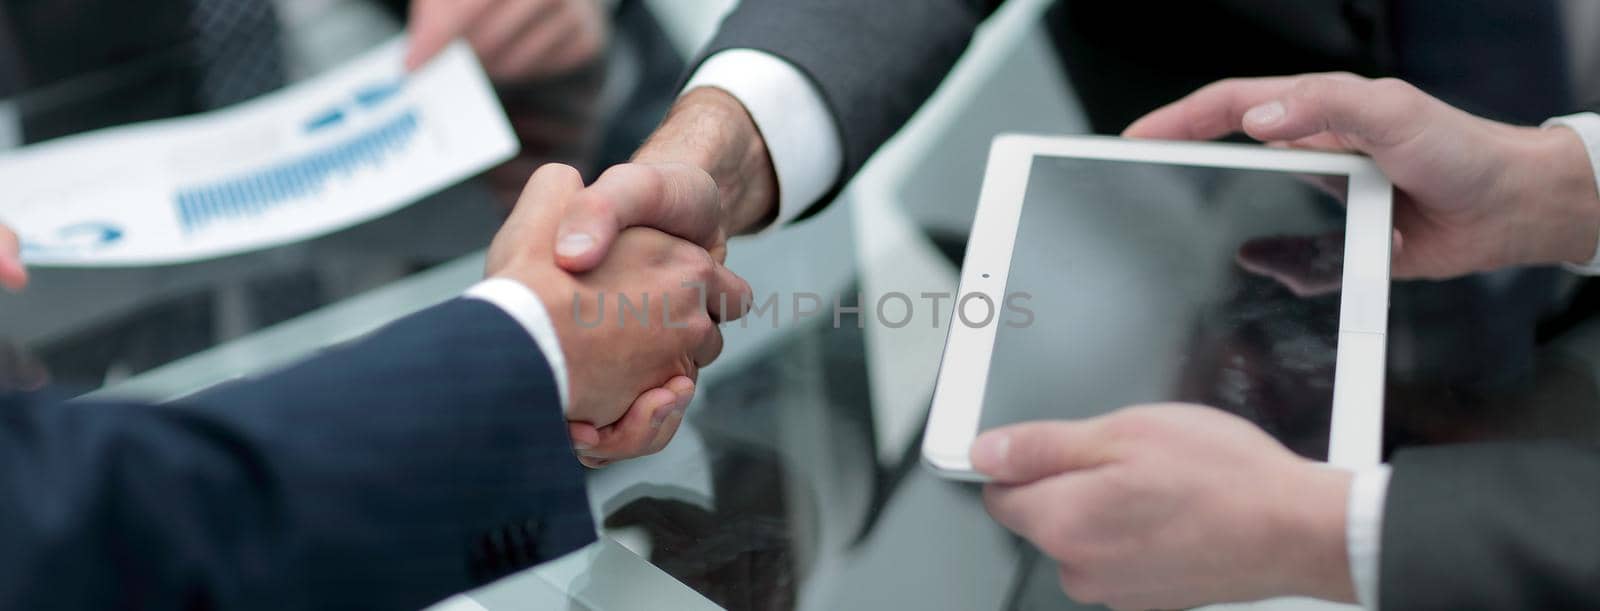 close up.businessman looking at tablet screen by asdf